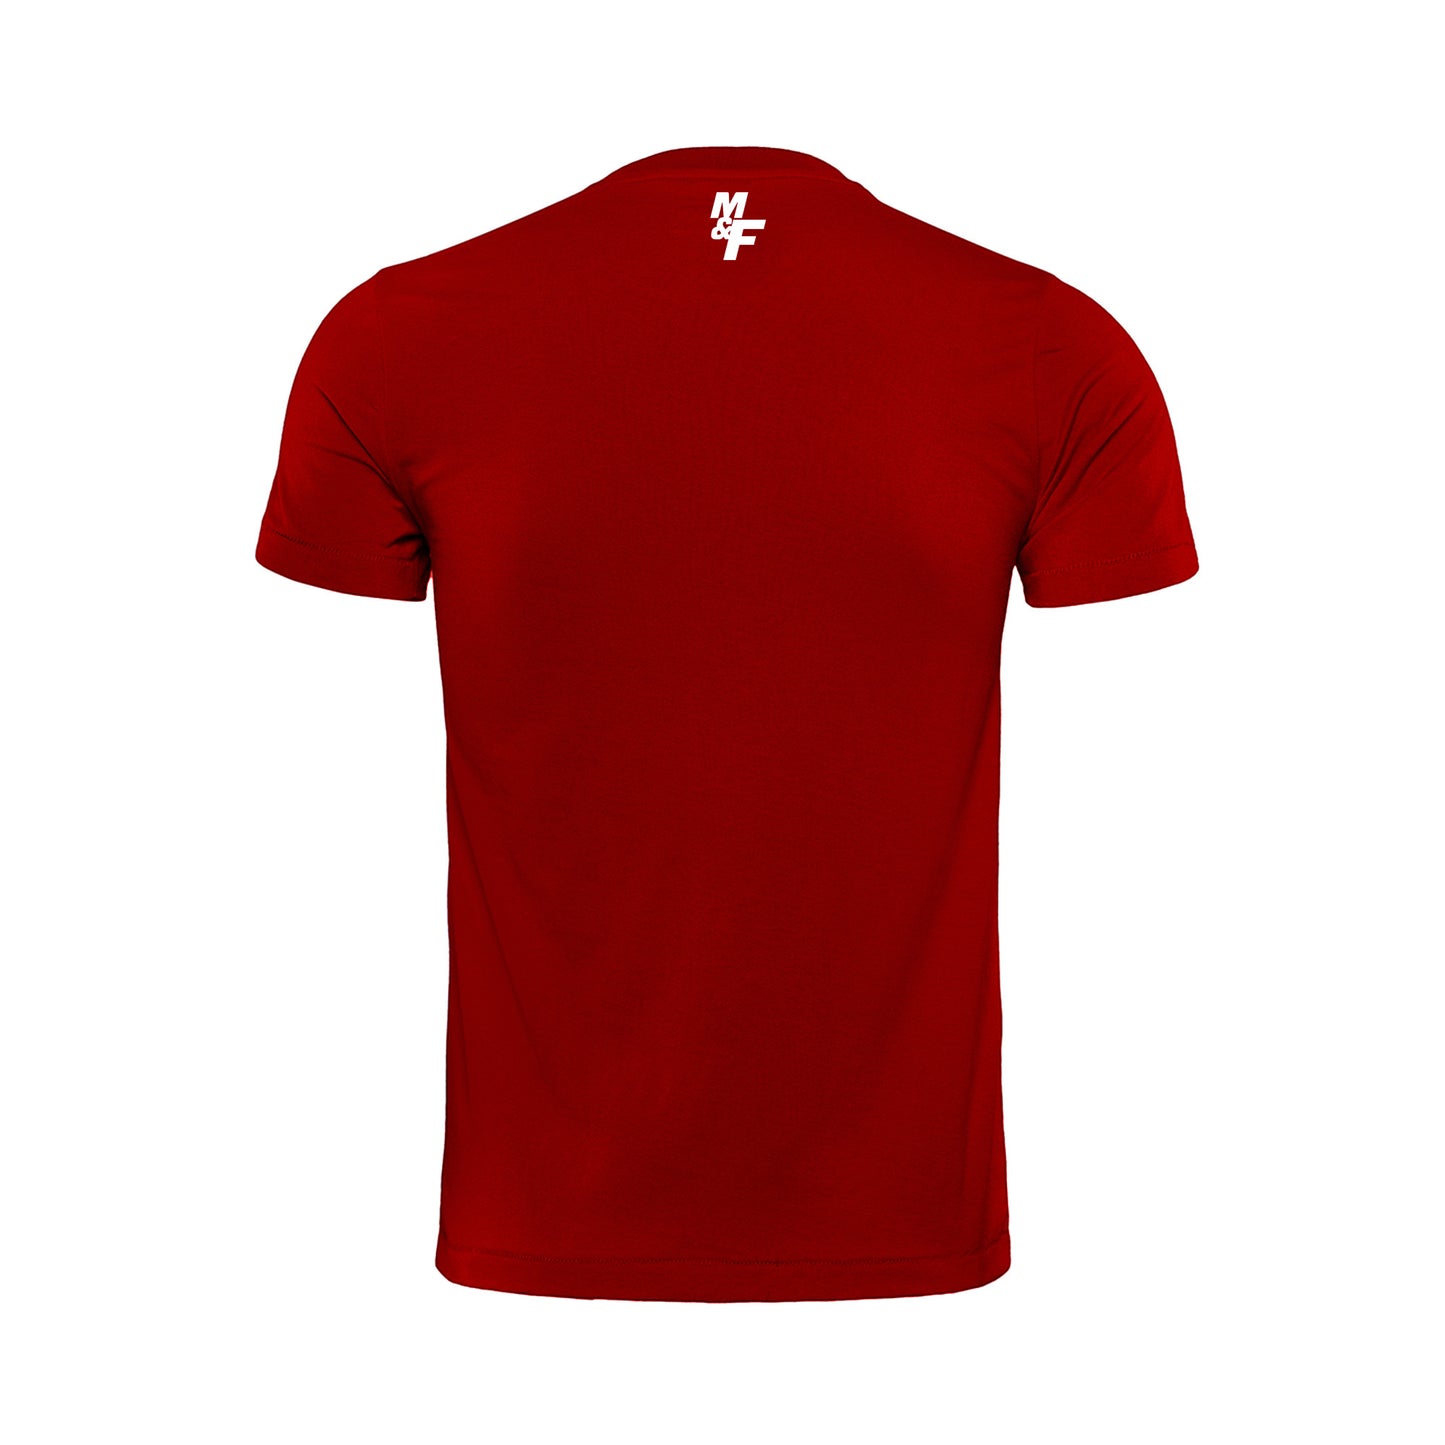 M & F Red T- Shirt